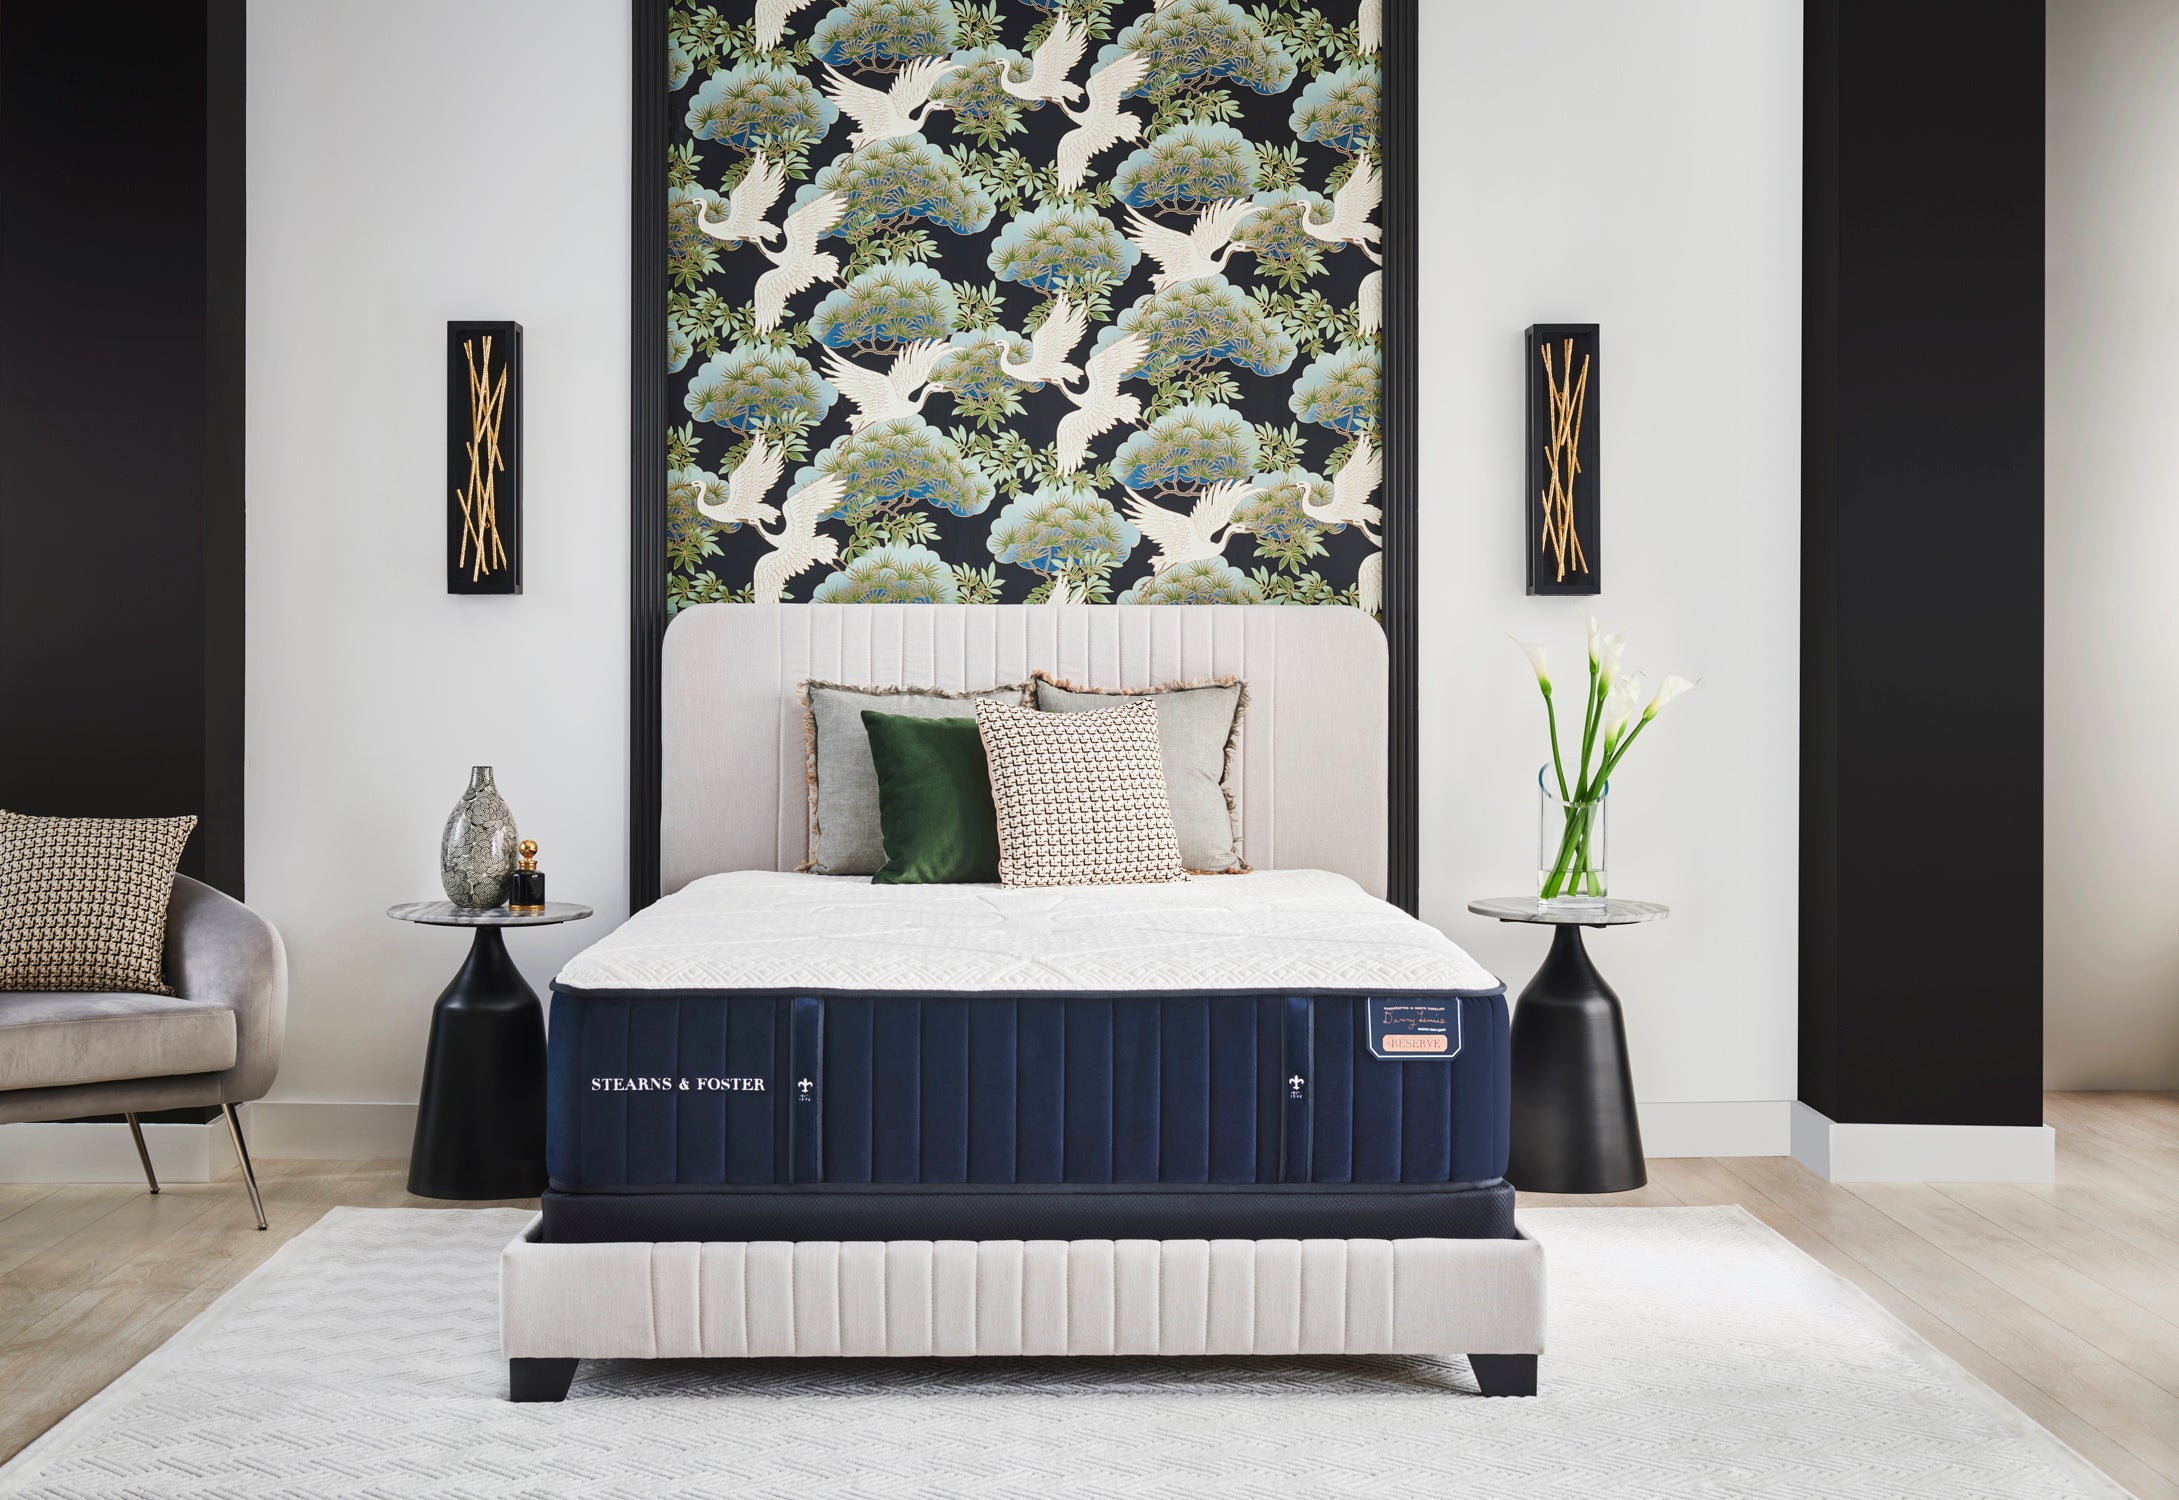 A stearns and foster mattress sits on a white upholstered bedframe in a minimalist modern style bedroom.